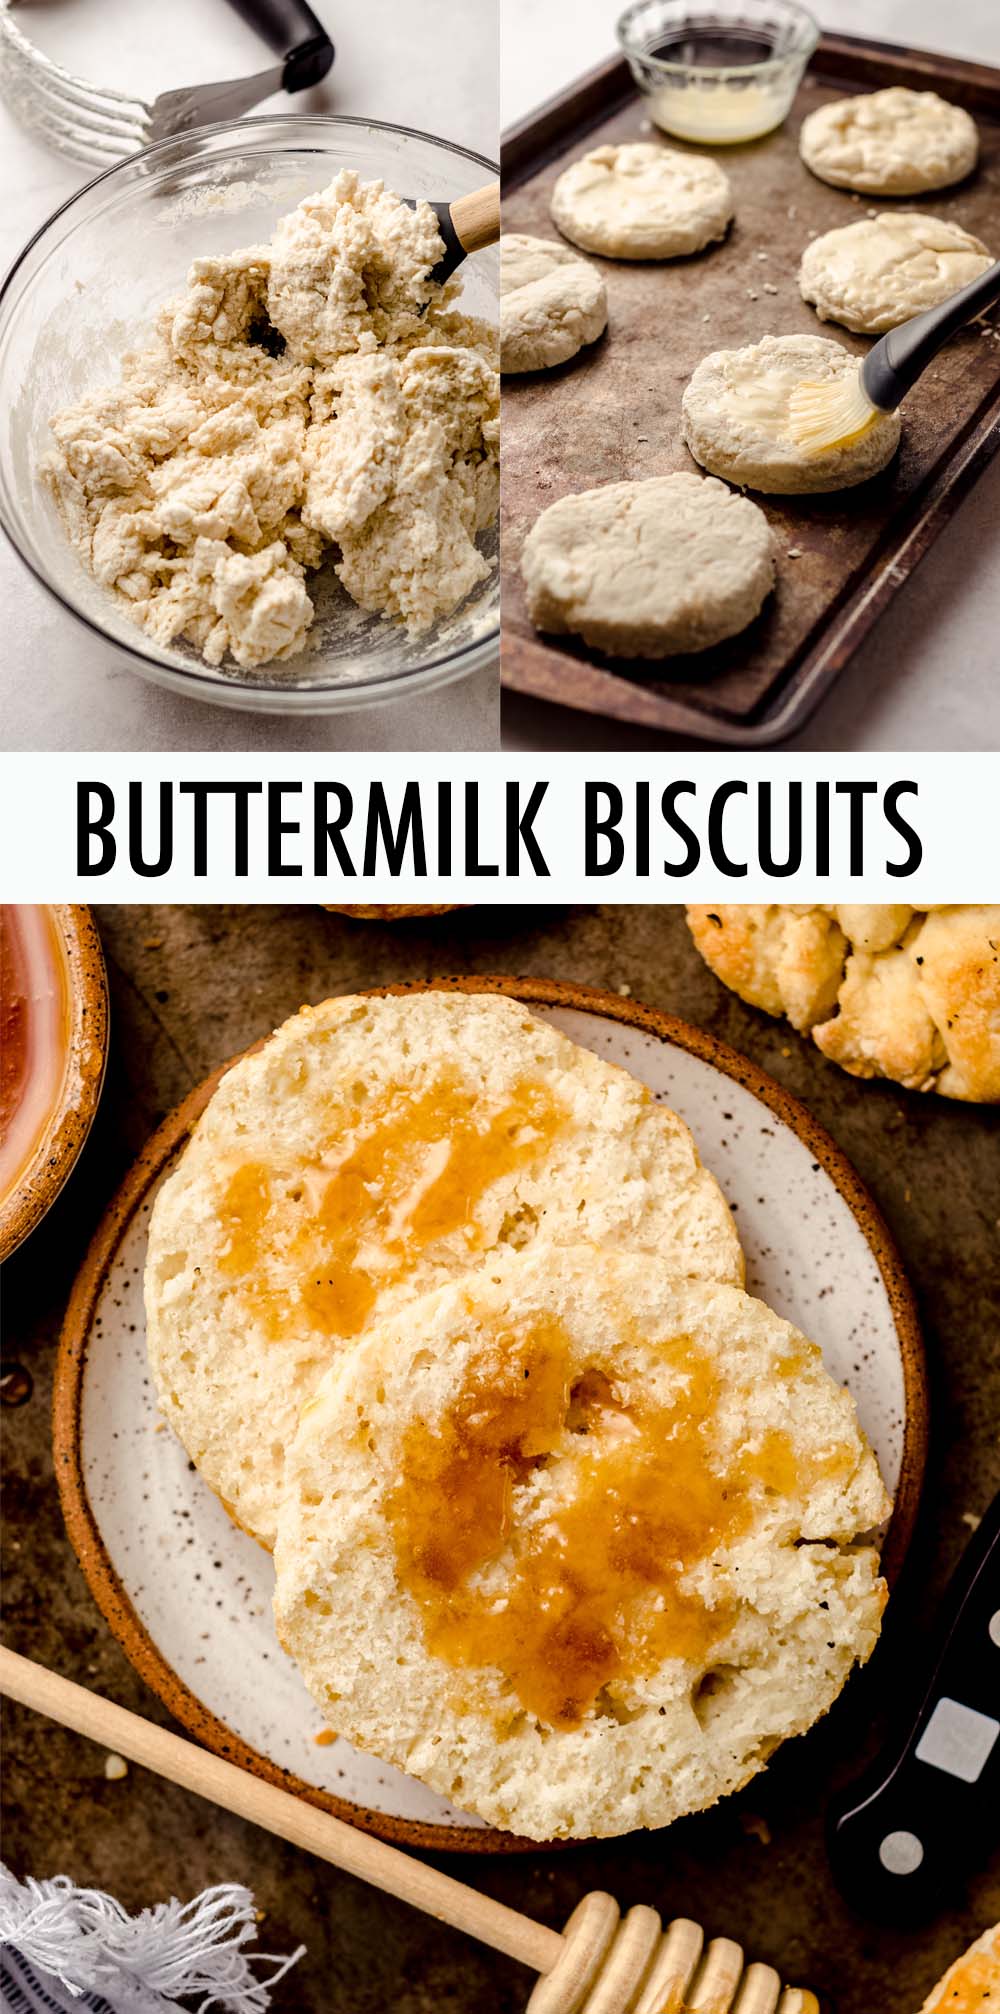 This homemade buttermilk biscuits recipe is crispy on the outside, flaky on the inside, and made with just a few simple ingredients. They can be made vegan with a couple easy swaps. via @frshaprilflours